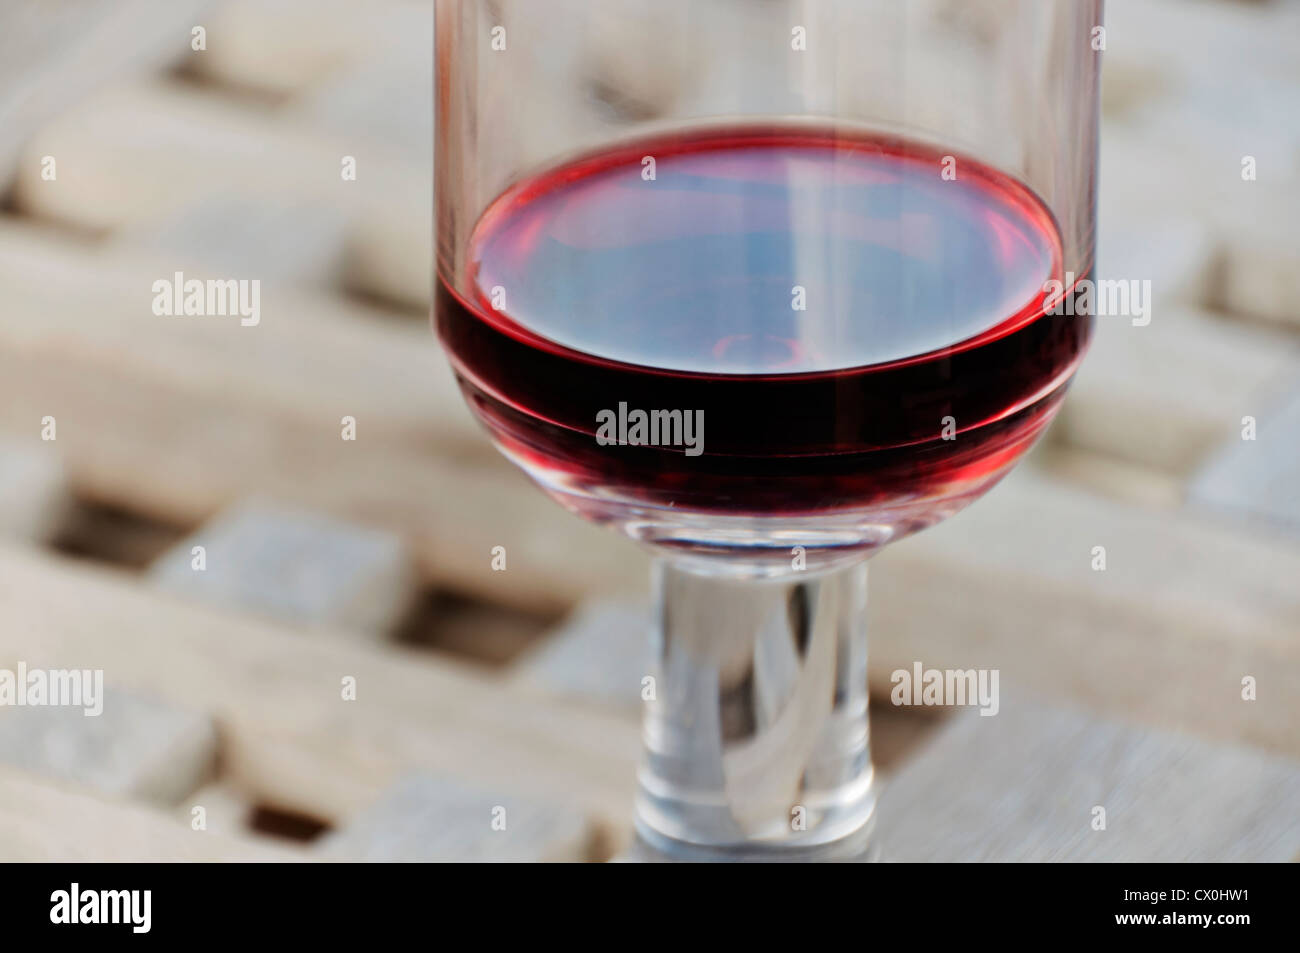 Closeup of a portion of a sturdy plastic wineglass filled  with red wine on an outdoor tabletop. Stock Photo